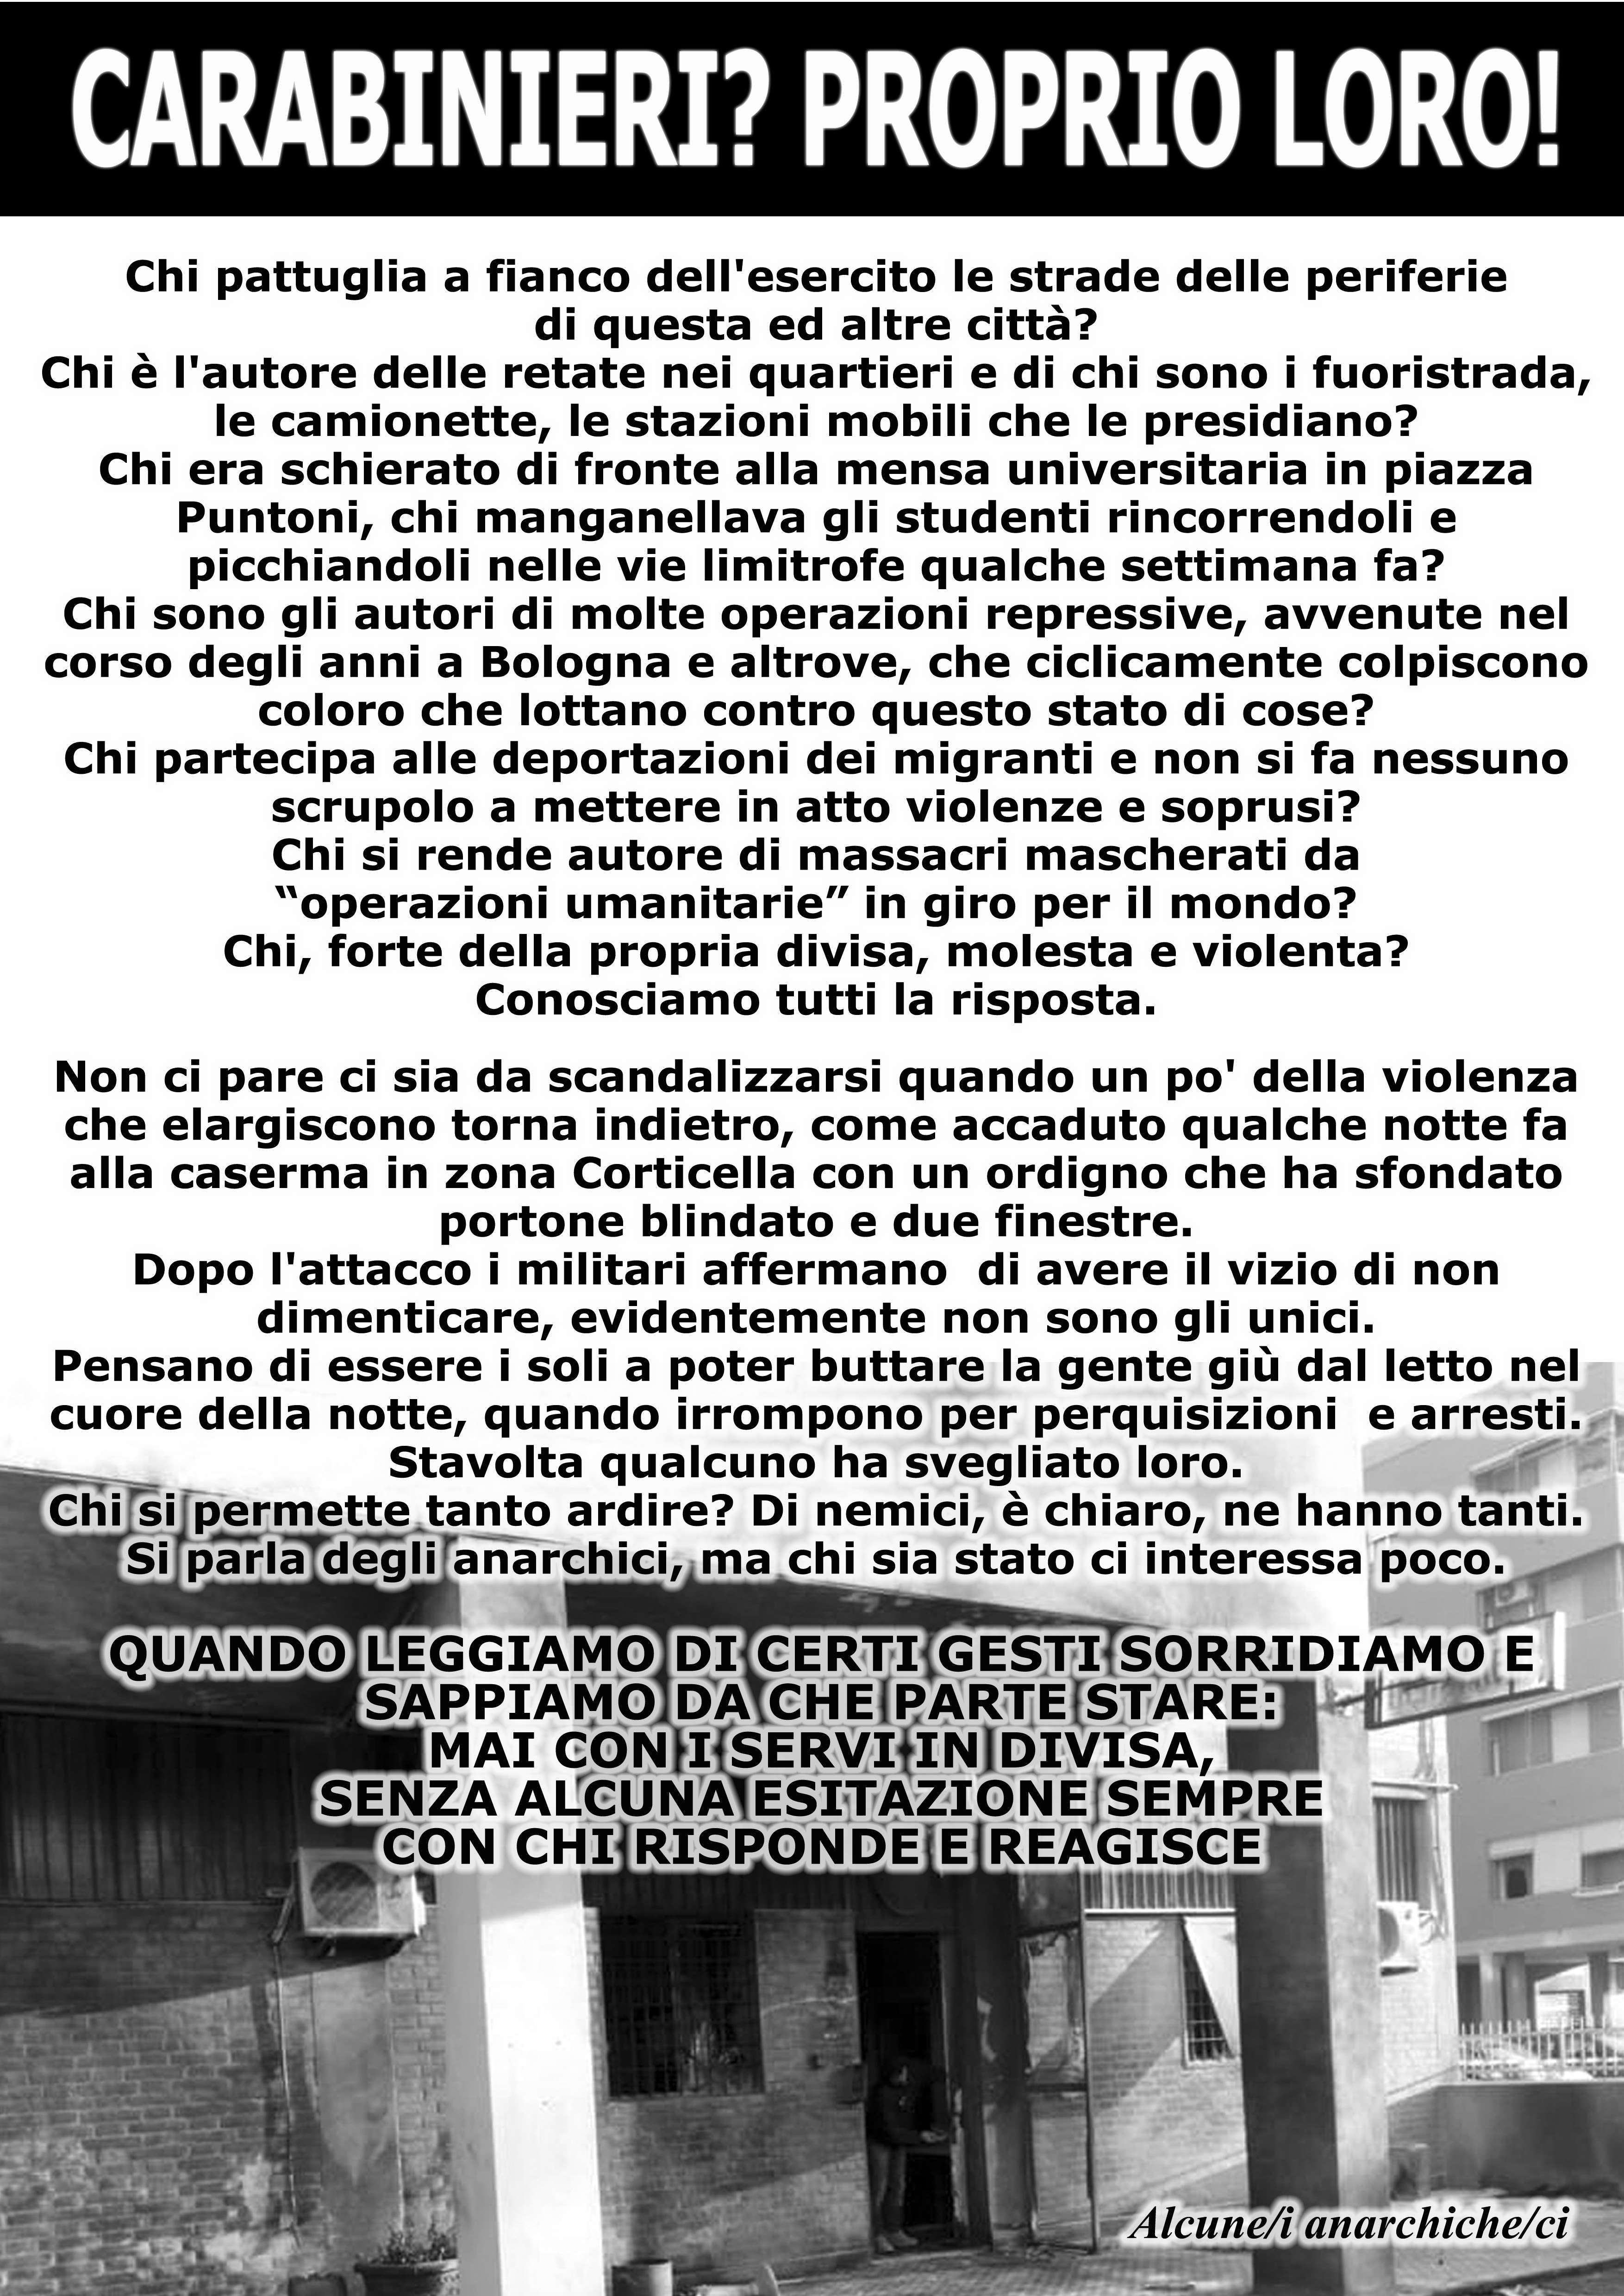 Bologna, Italy: Poster put up following the attack on carabinieri barracks